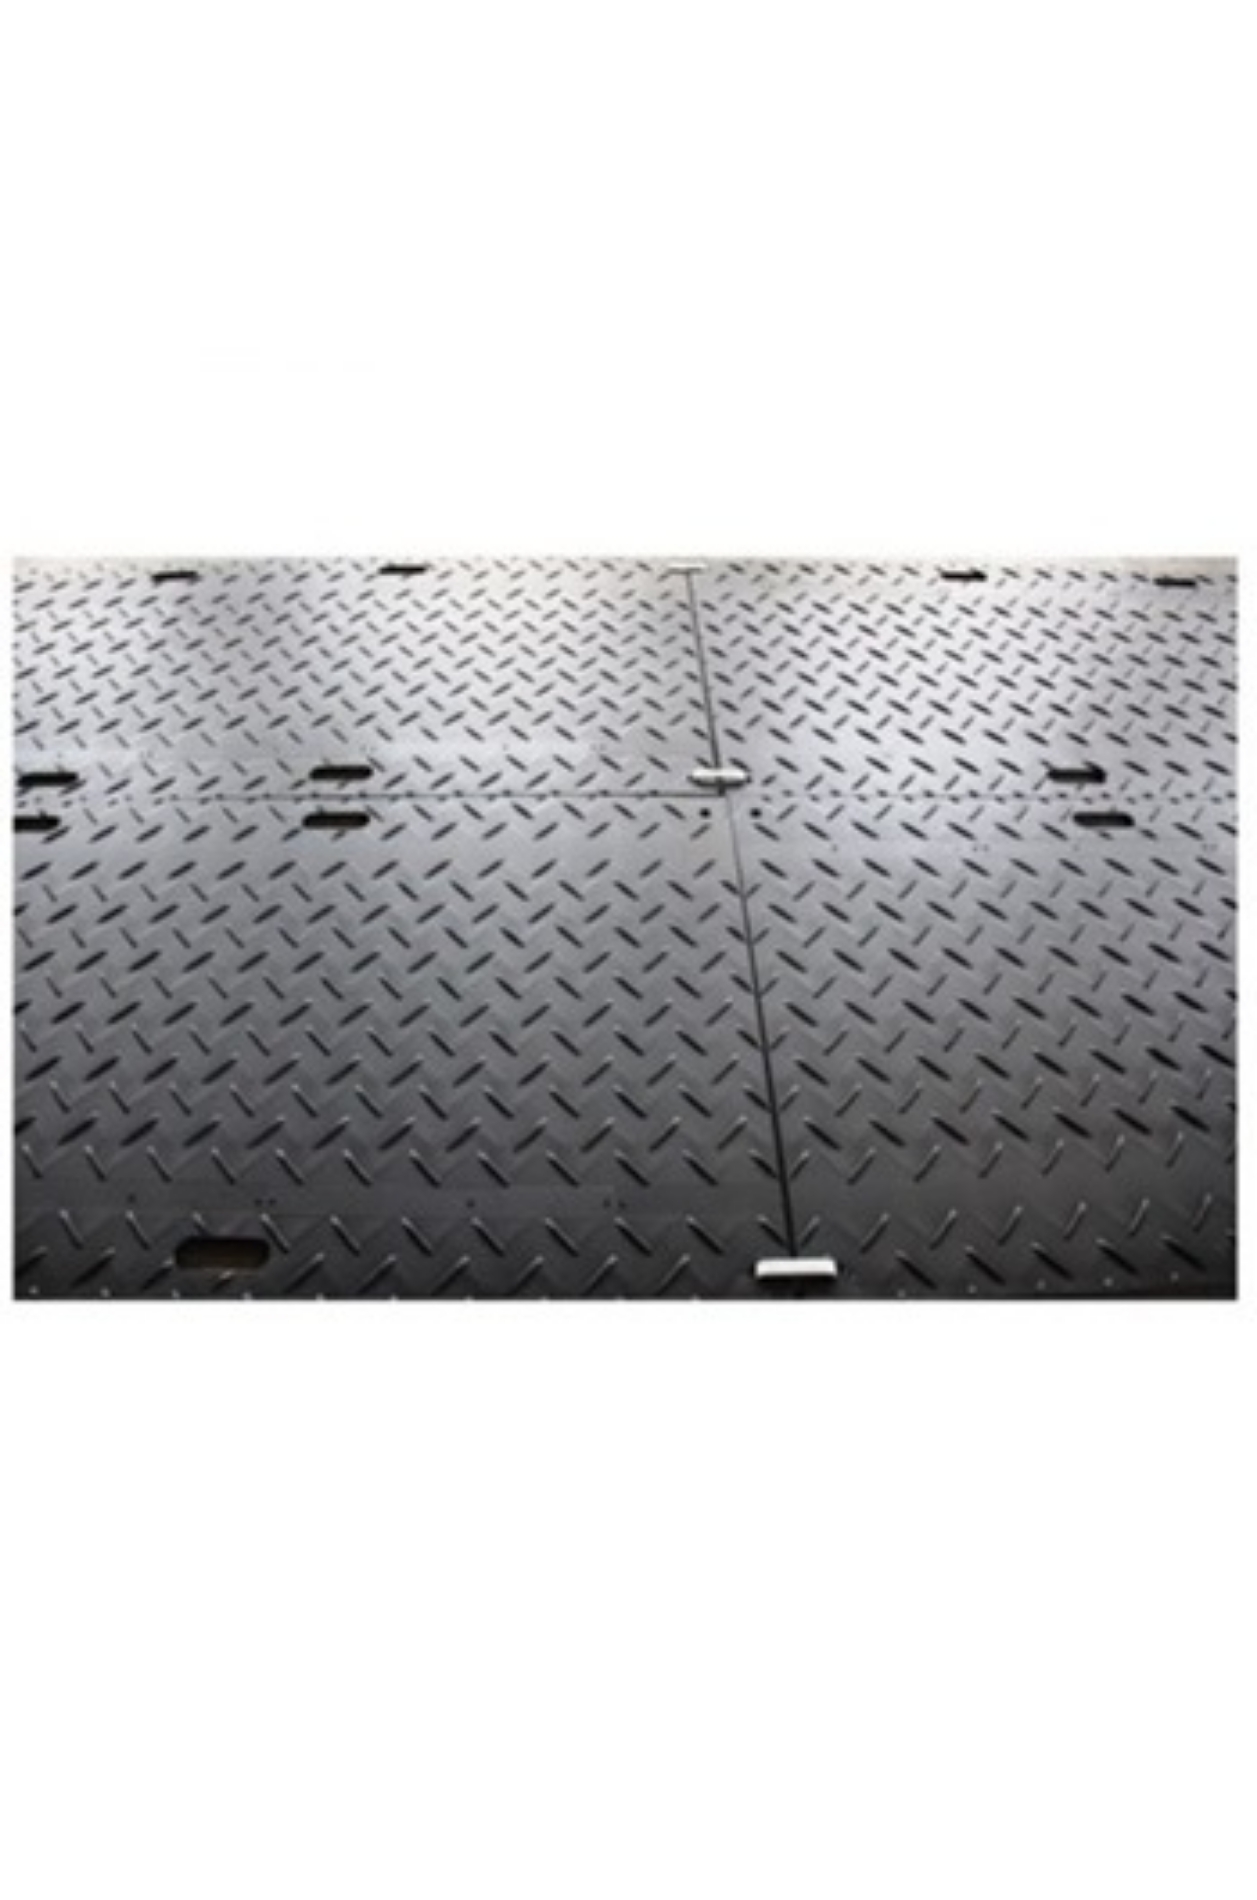 Picture of TVH Extruded Ground Mat Spreader Pad - Black (1800 x 900 x 12.7mm)